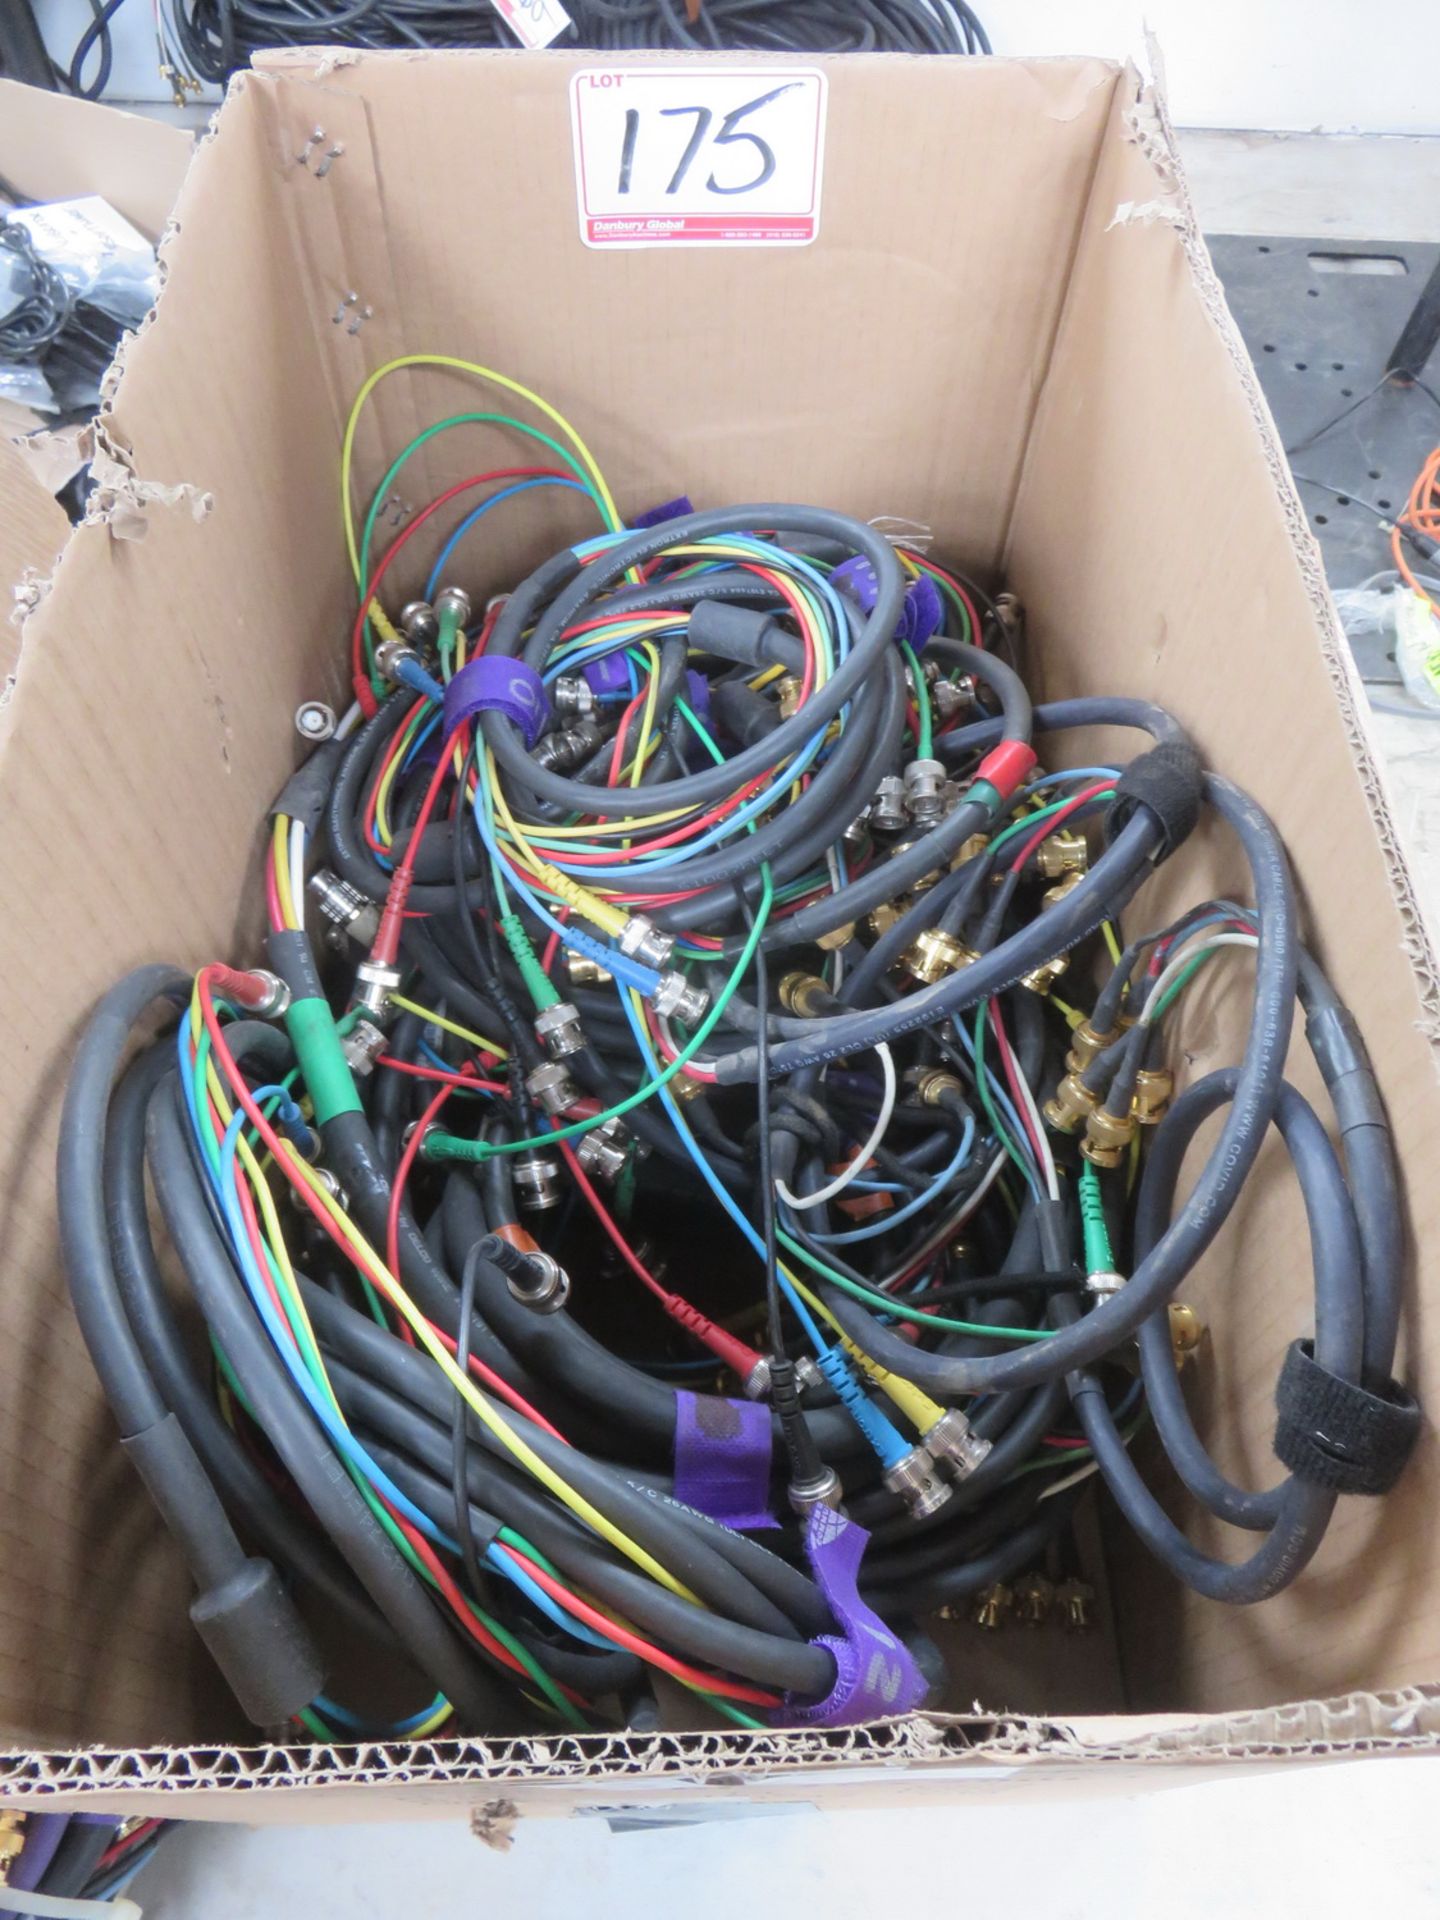 LOT - ASSORTED PRO BNC VIDEO CABLES - FROM 3' TO 25'L